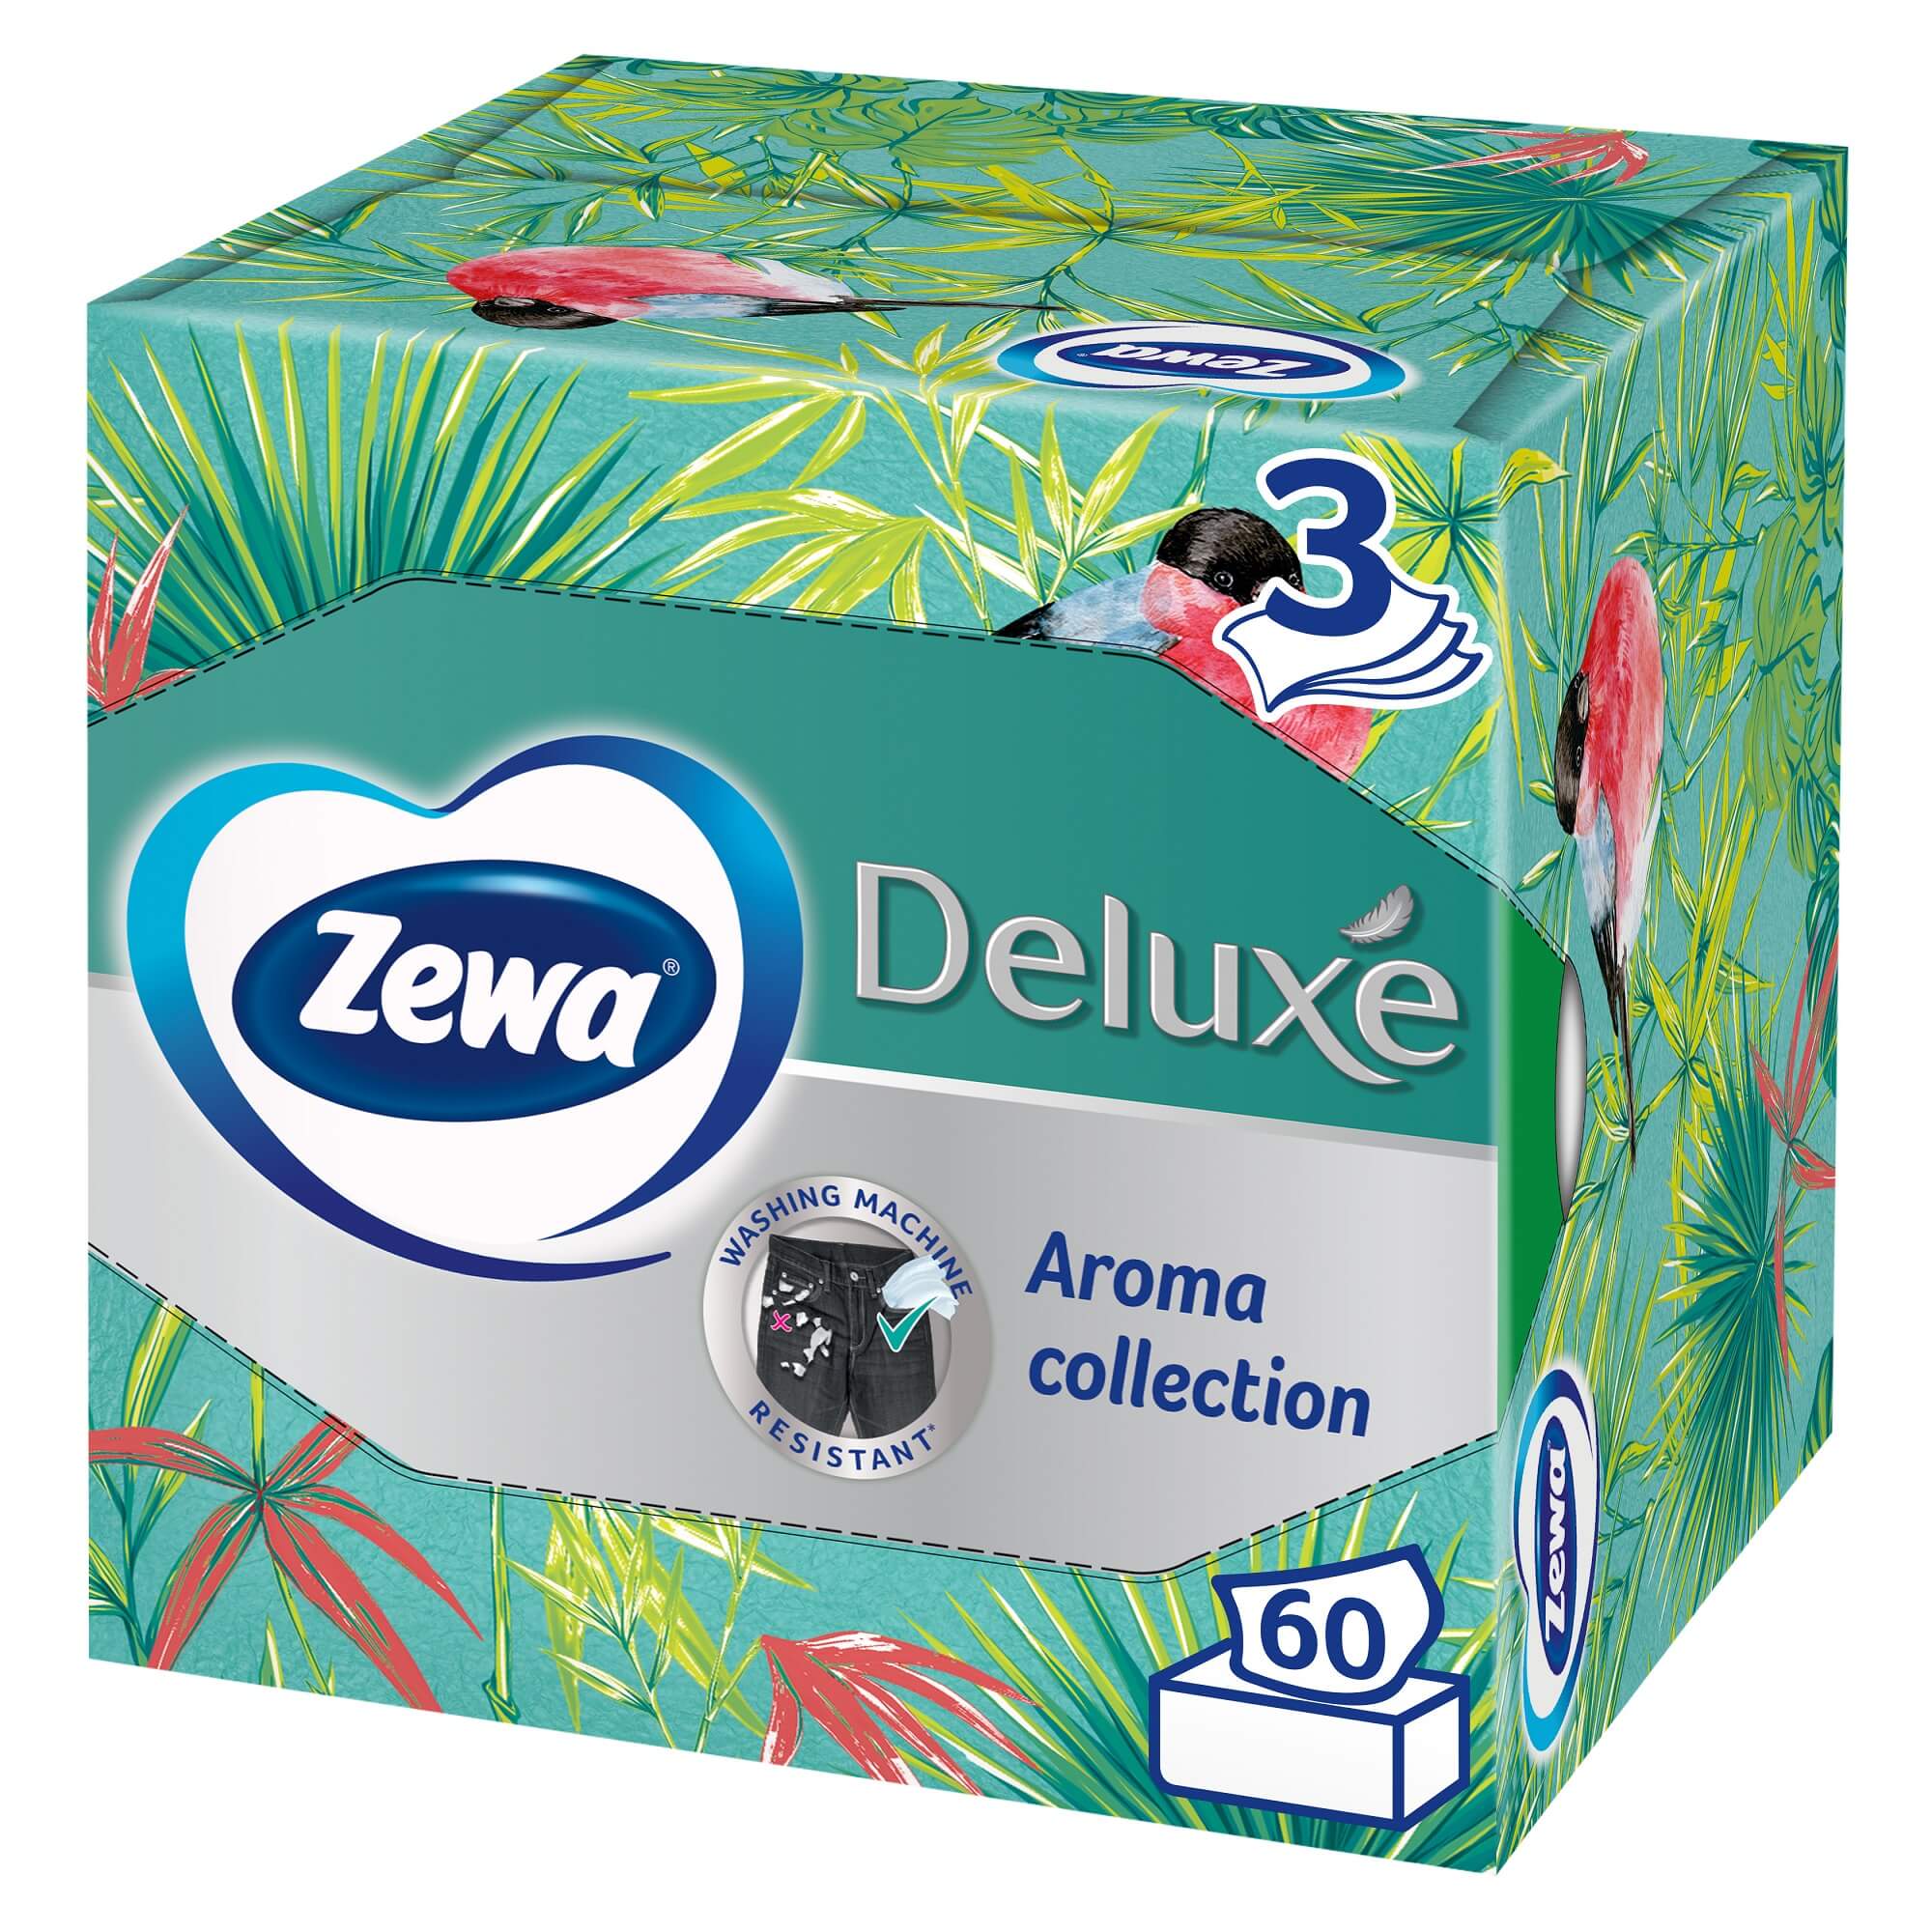 Sca Χαρτομάντηλα Επιτραπέζια Deluxe Chamomille Zewa (177g/60 φ)